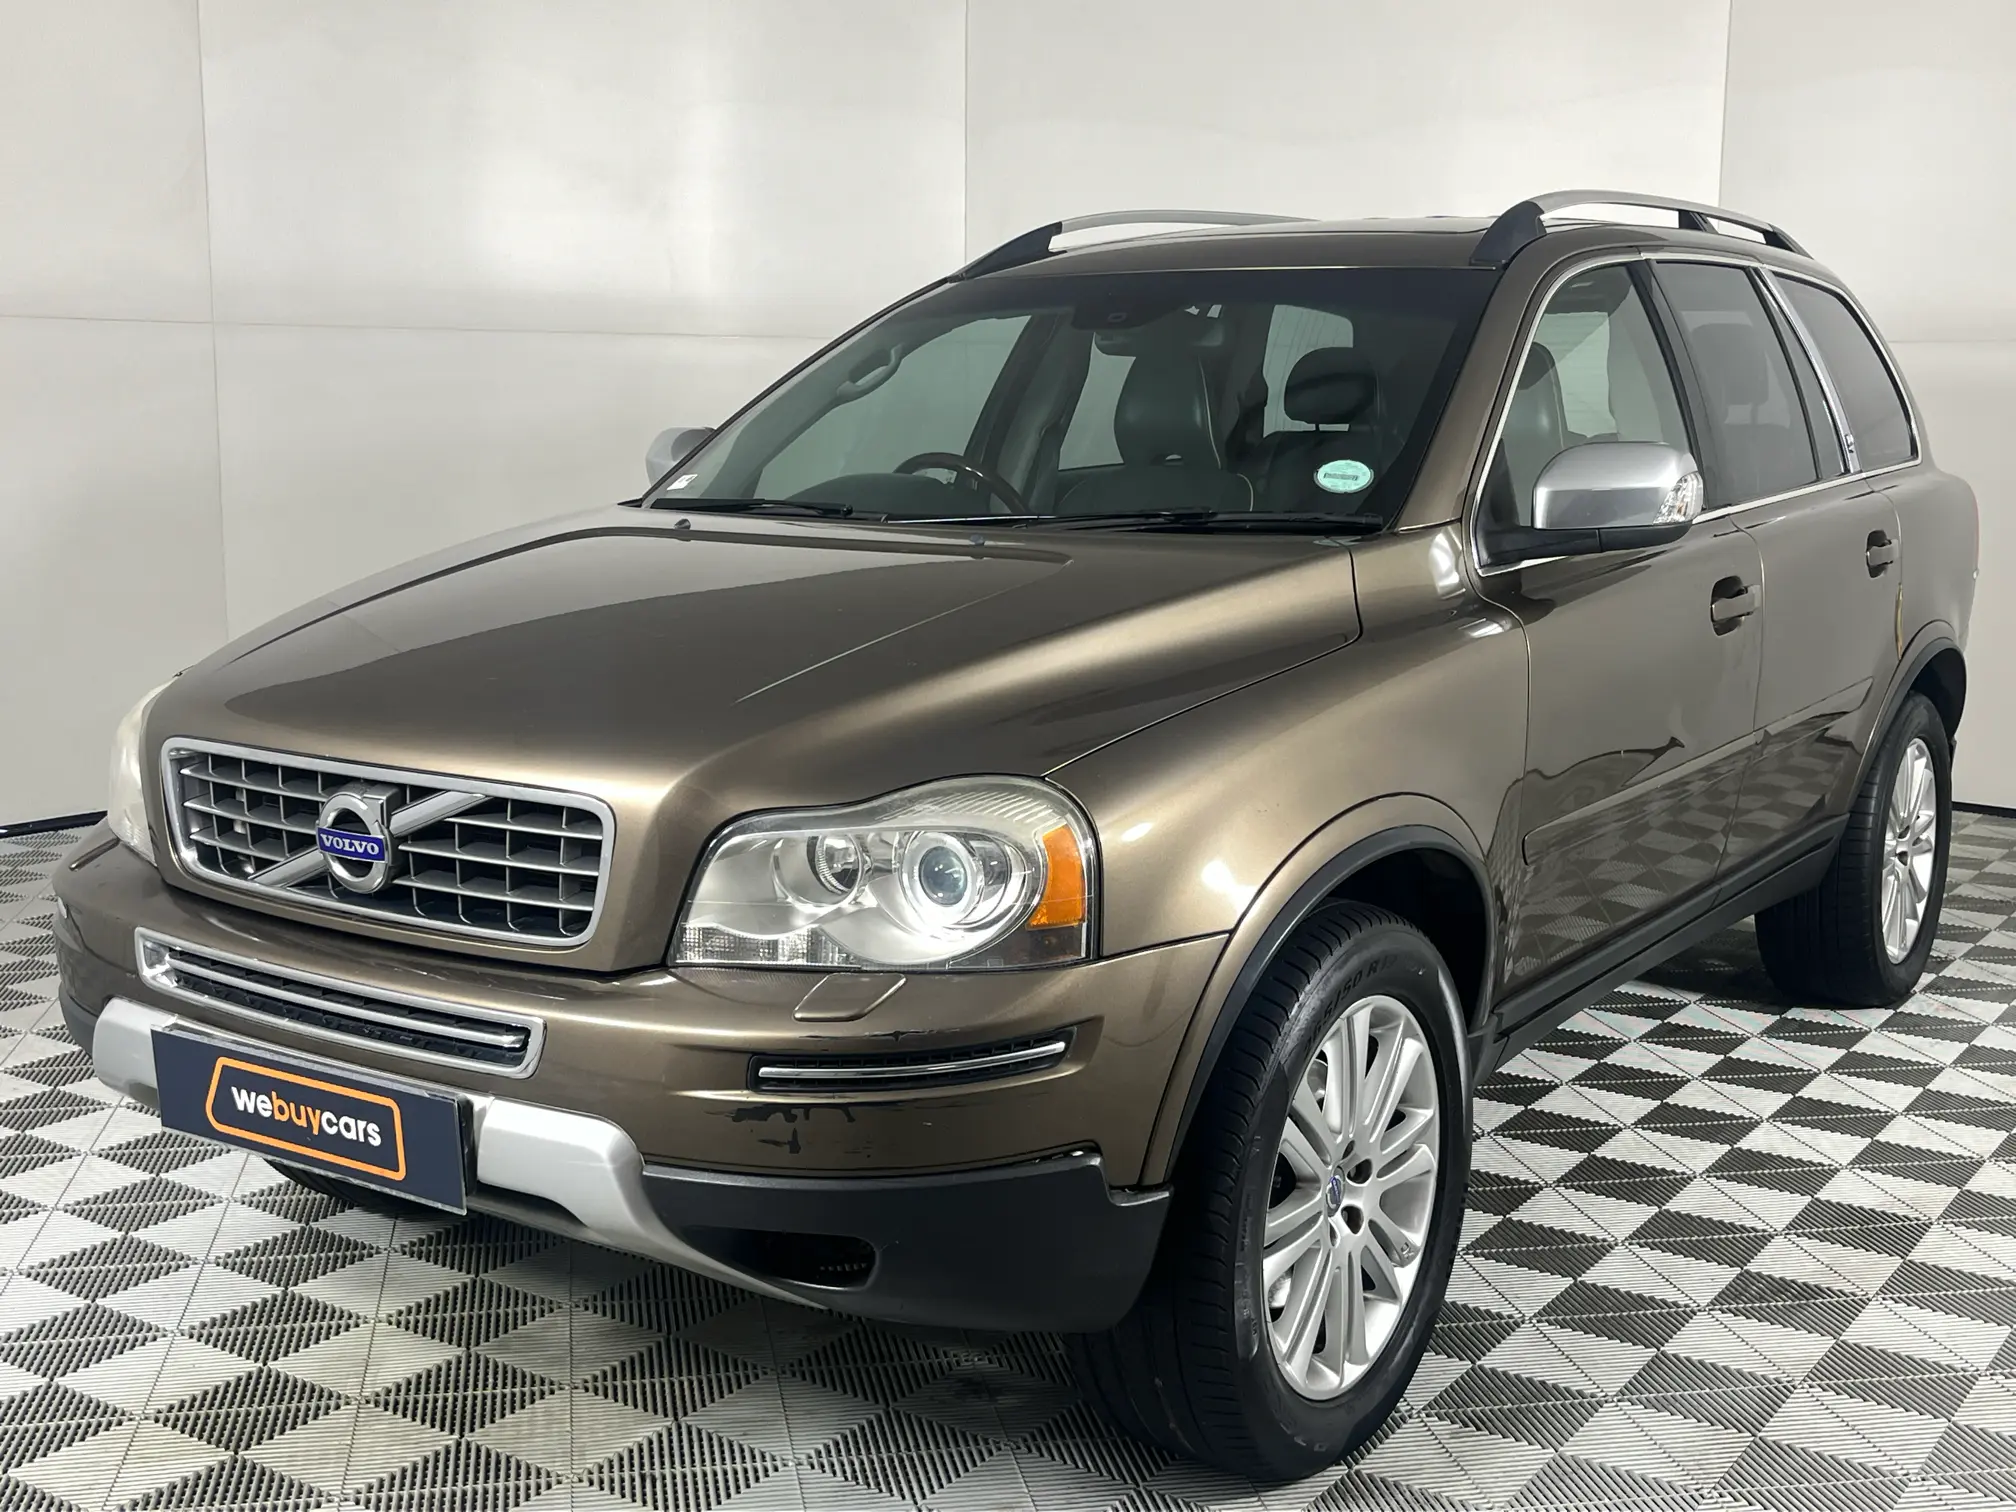 2012 Volvo XC 90 D5 Geartronic Executive AWD